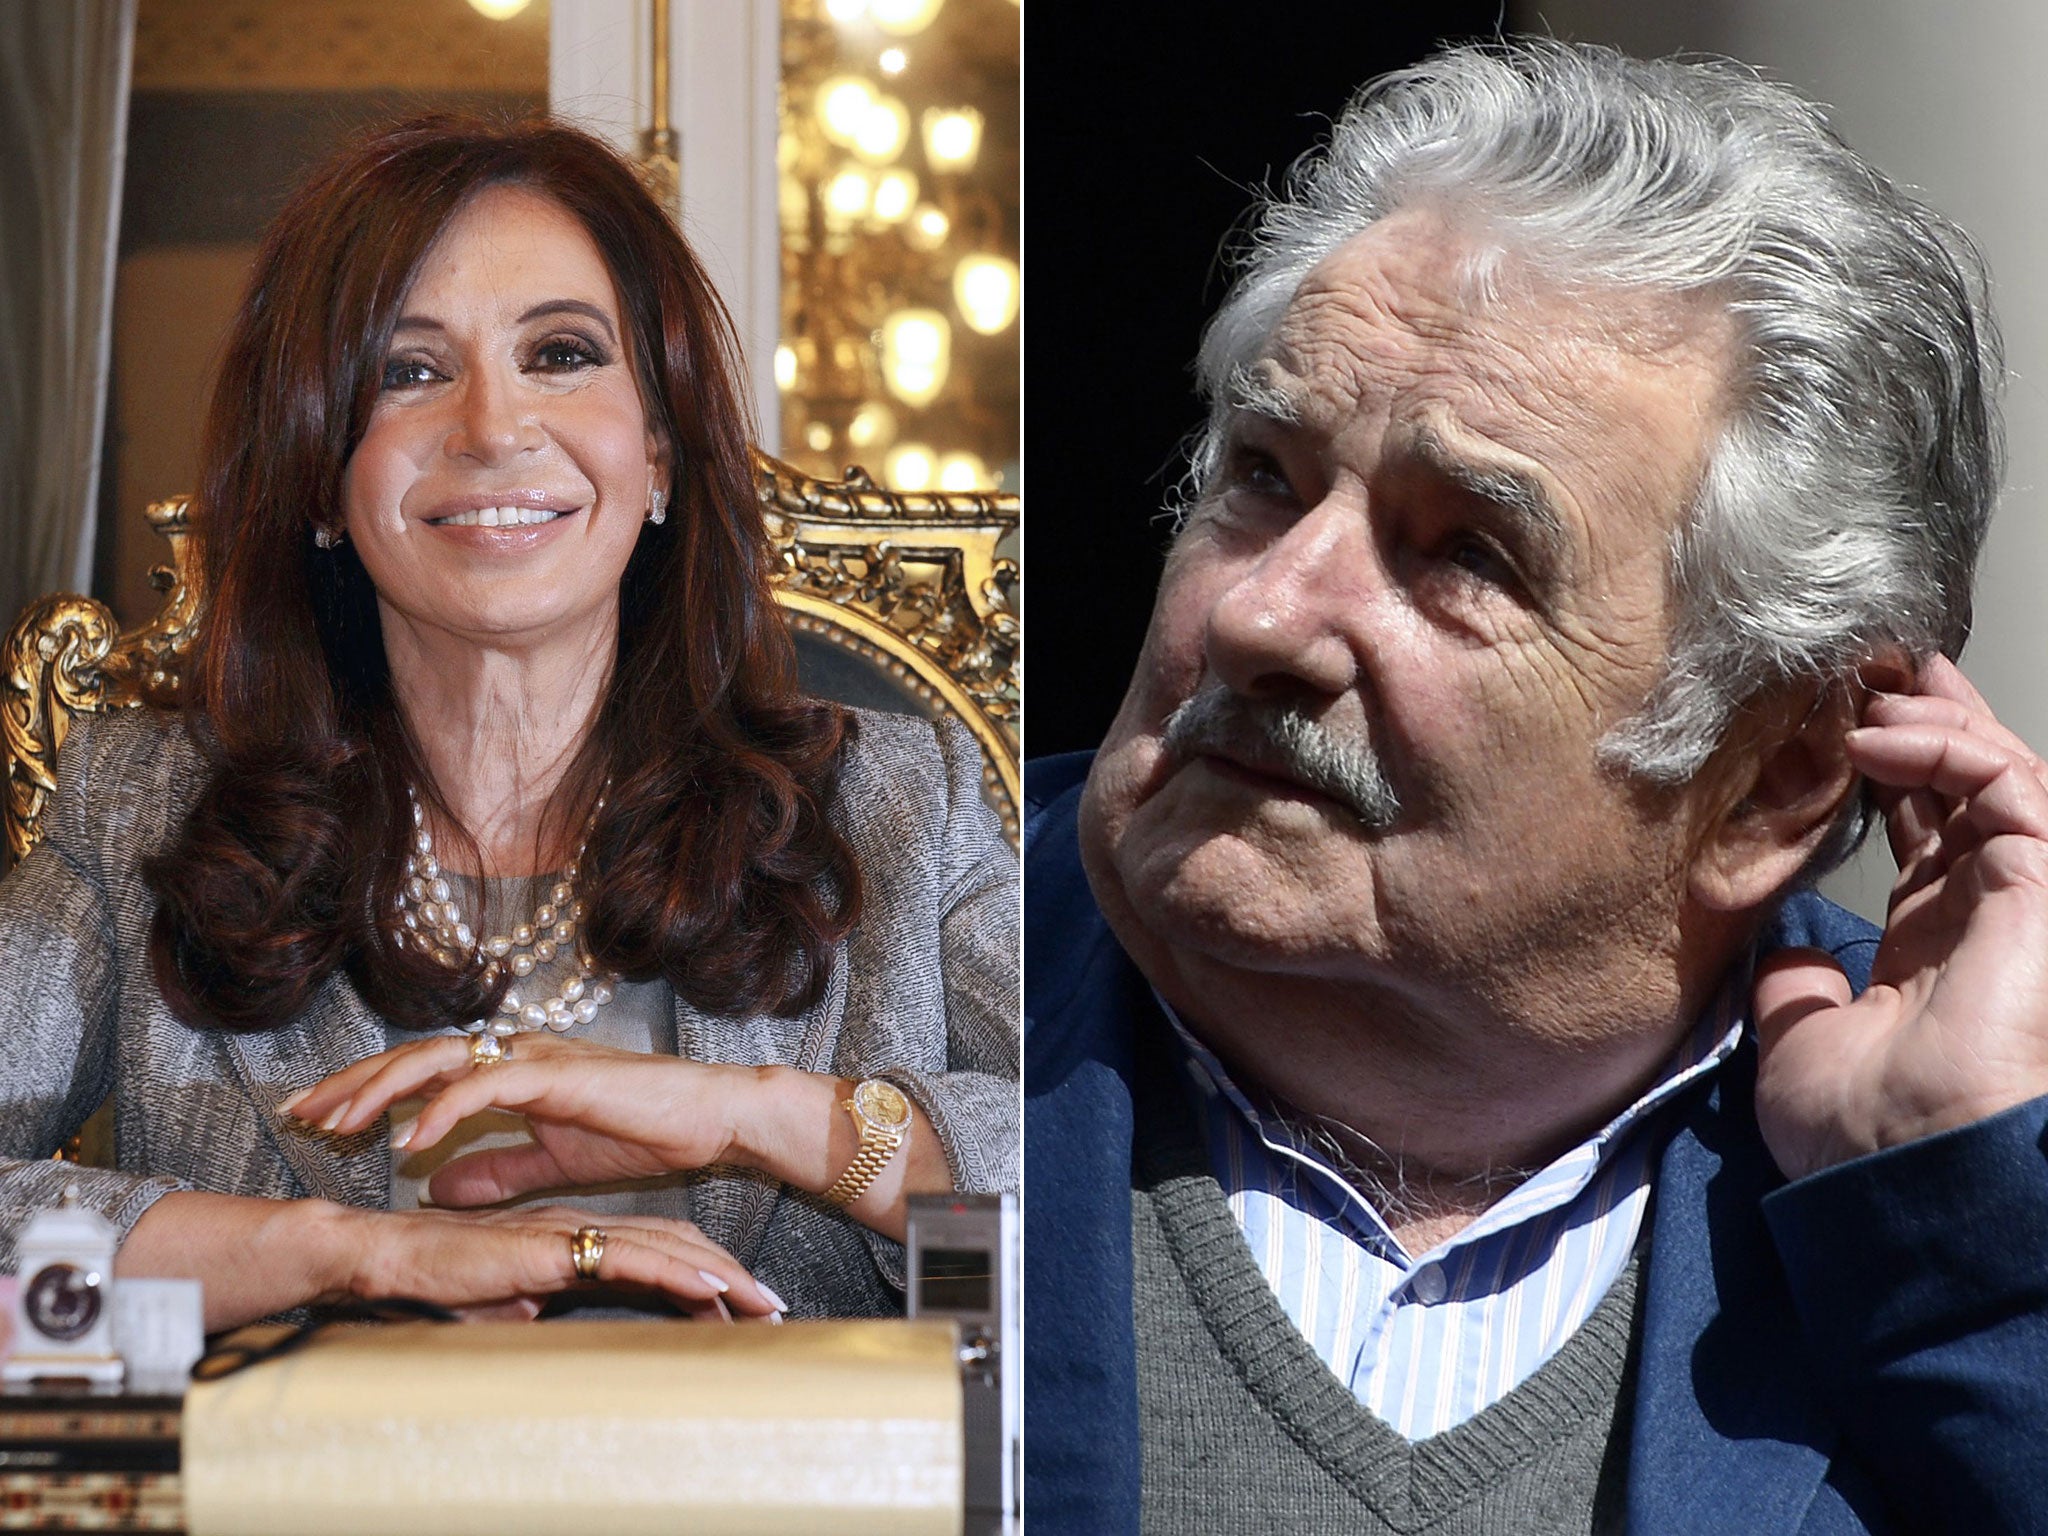 The Uruguayan president José Mujica (right) is embroiled in a diplomatic row today after he was reportedly caught referring to the Argentinian PM, Cristina Fernández (left), as an 'old hag'.